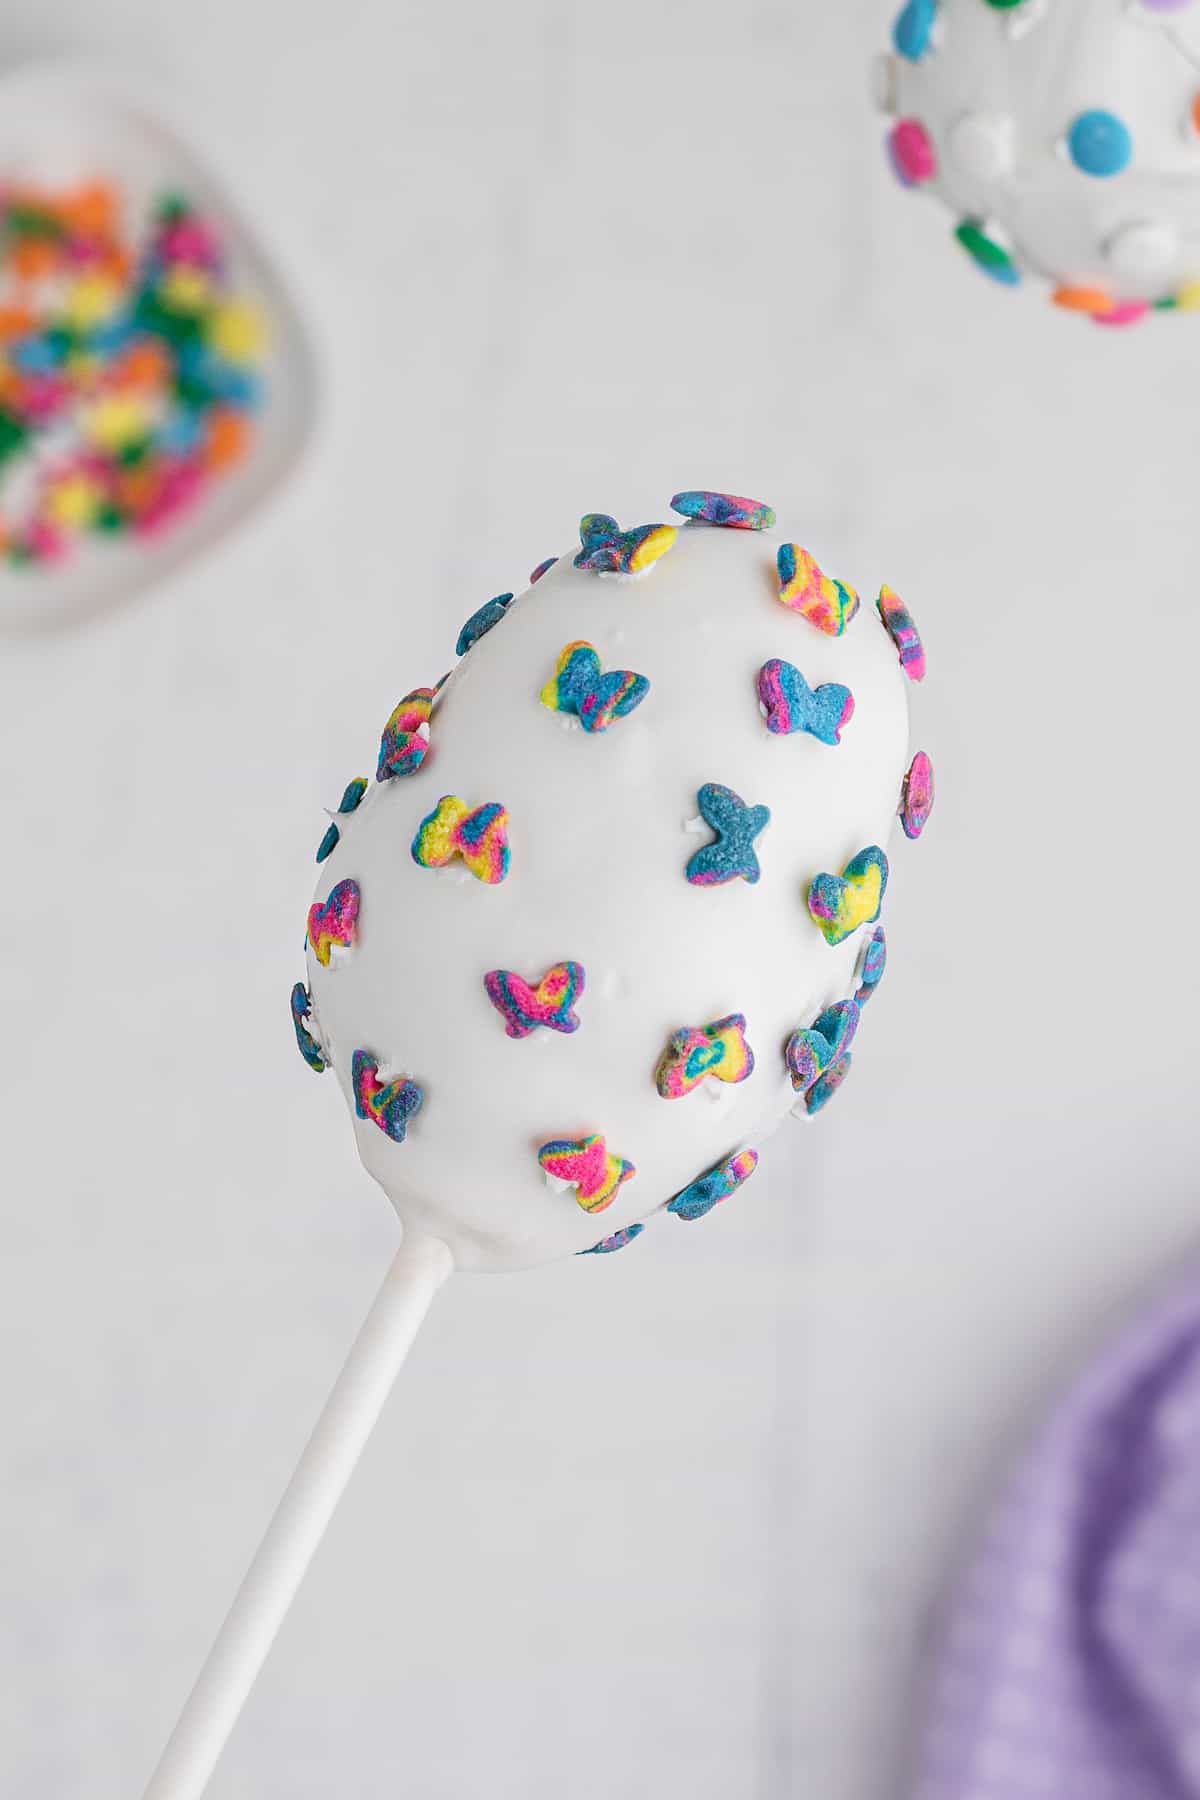 use extra candy melts to attach sprinkles to the cake pop